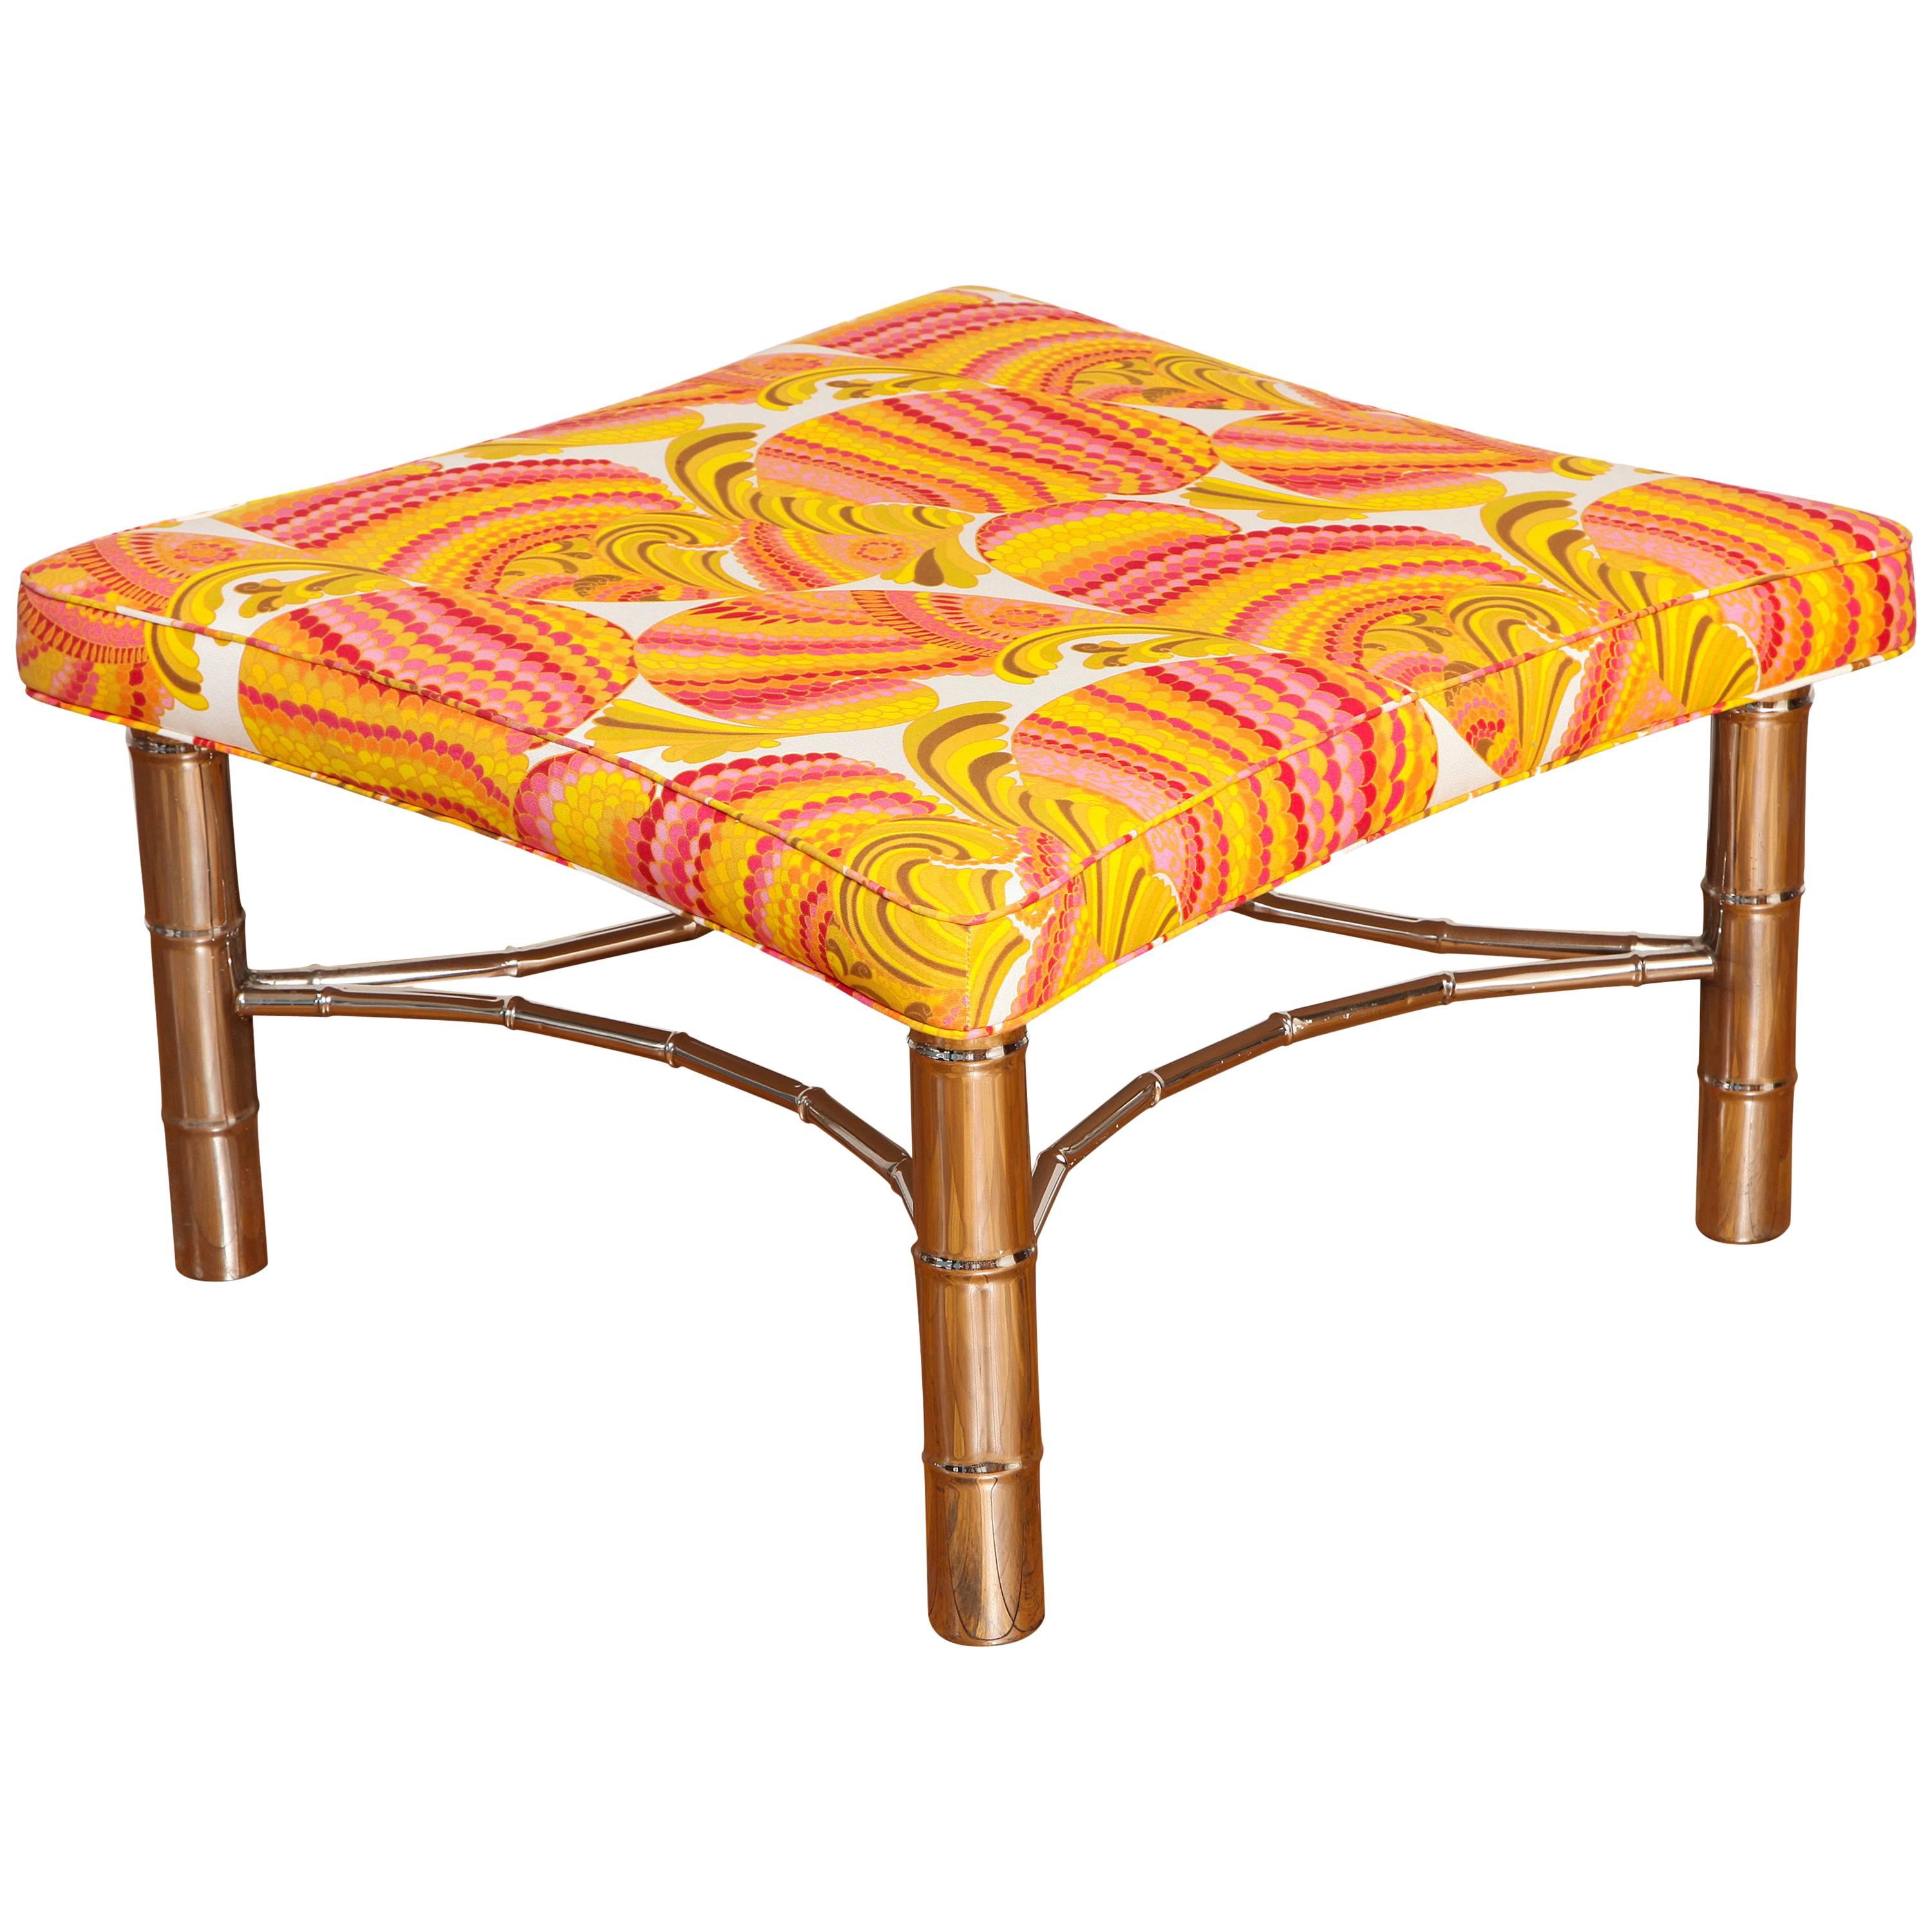 Faux Bamboo Ottoman with Chrome Legs and Stretcher in Emilio Pucci Fabric